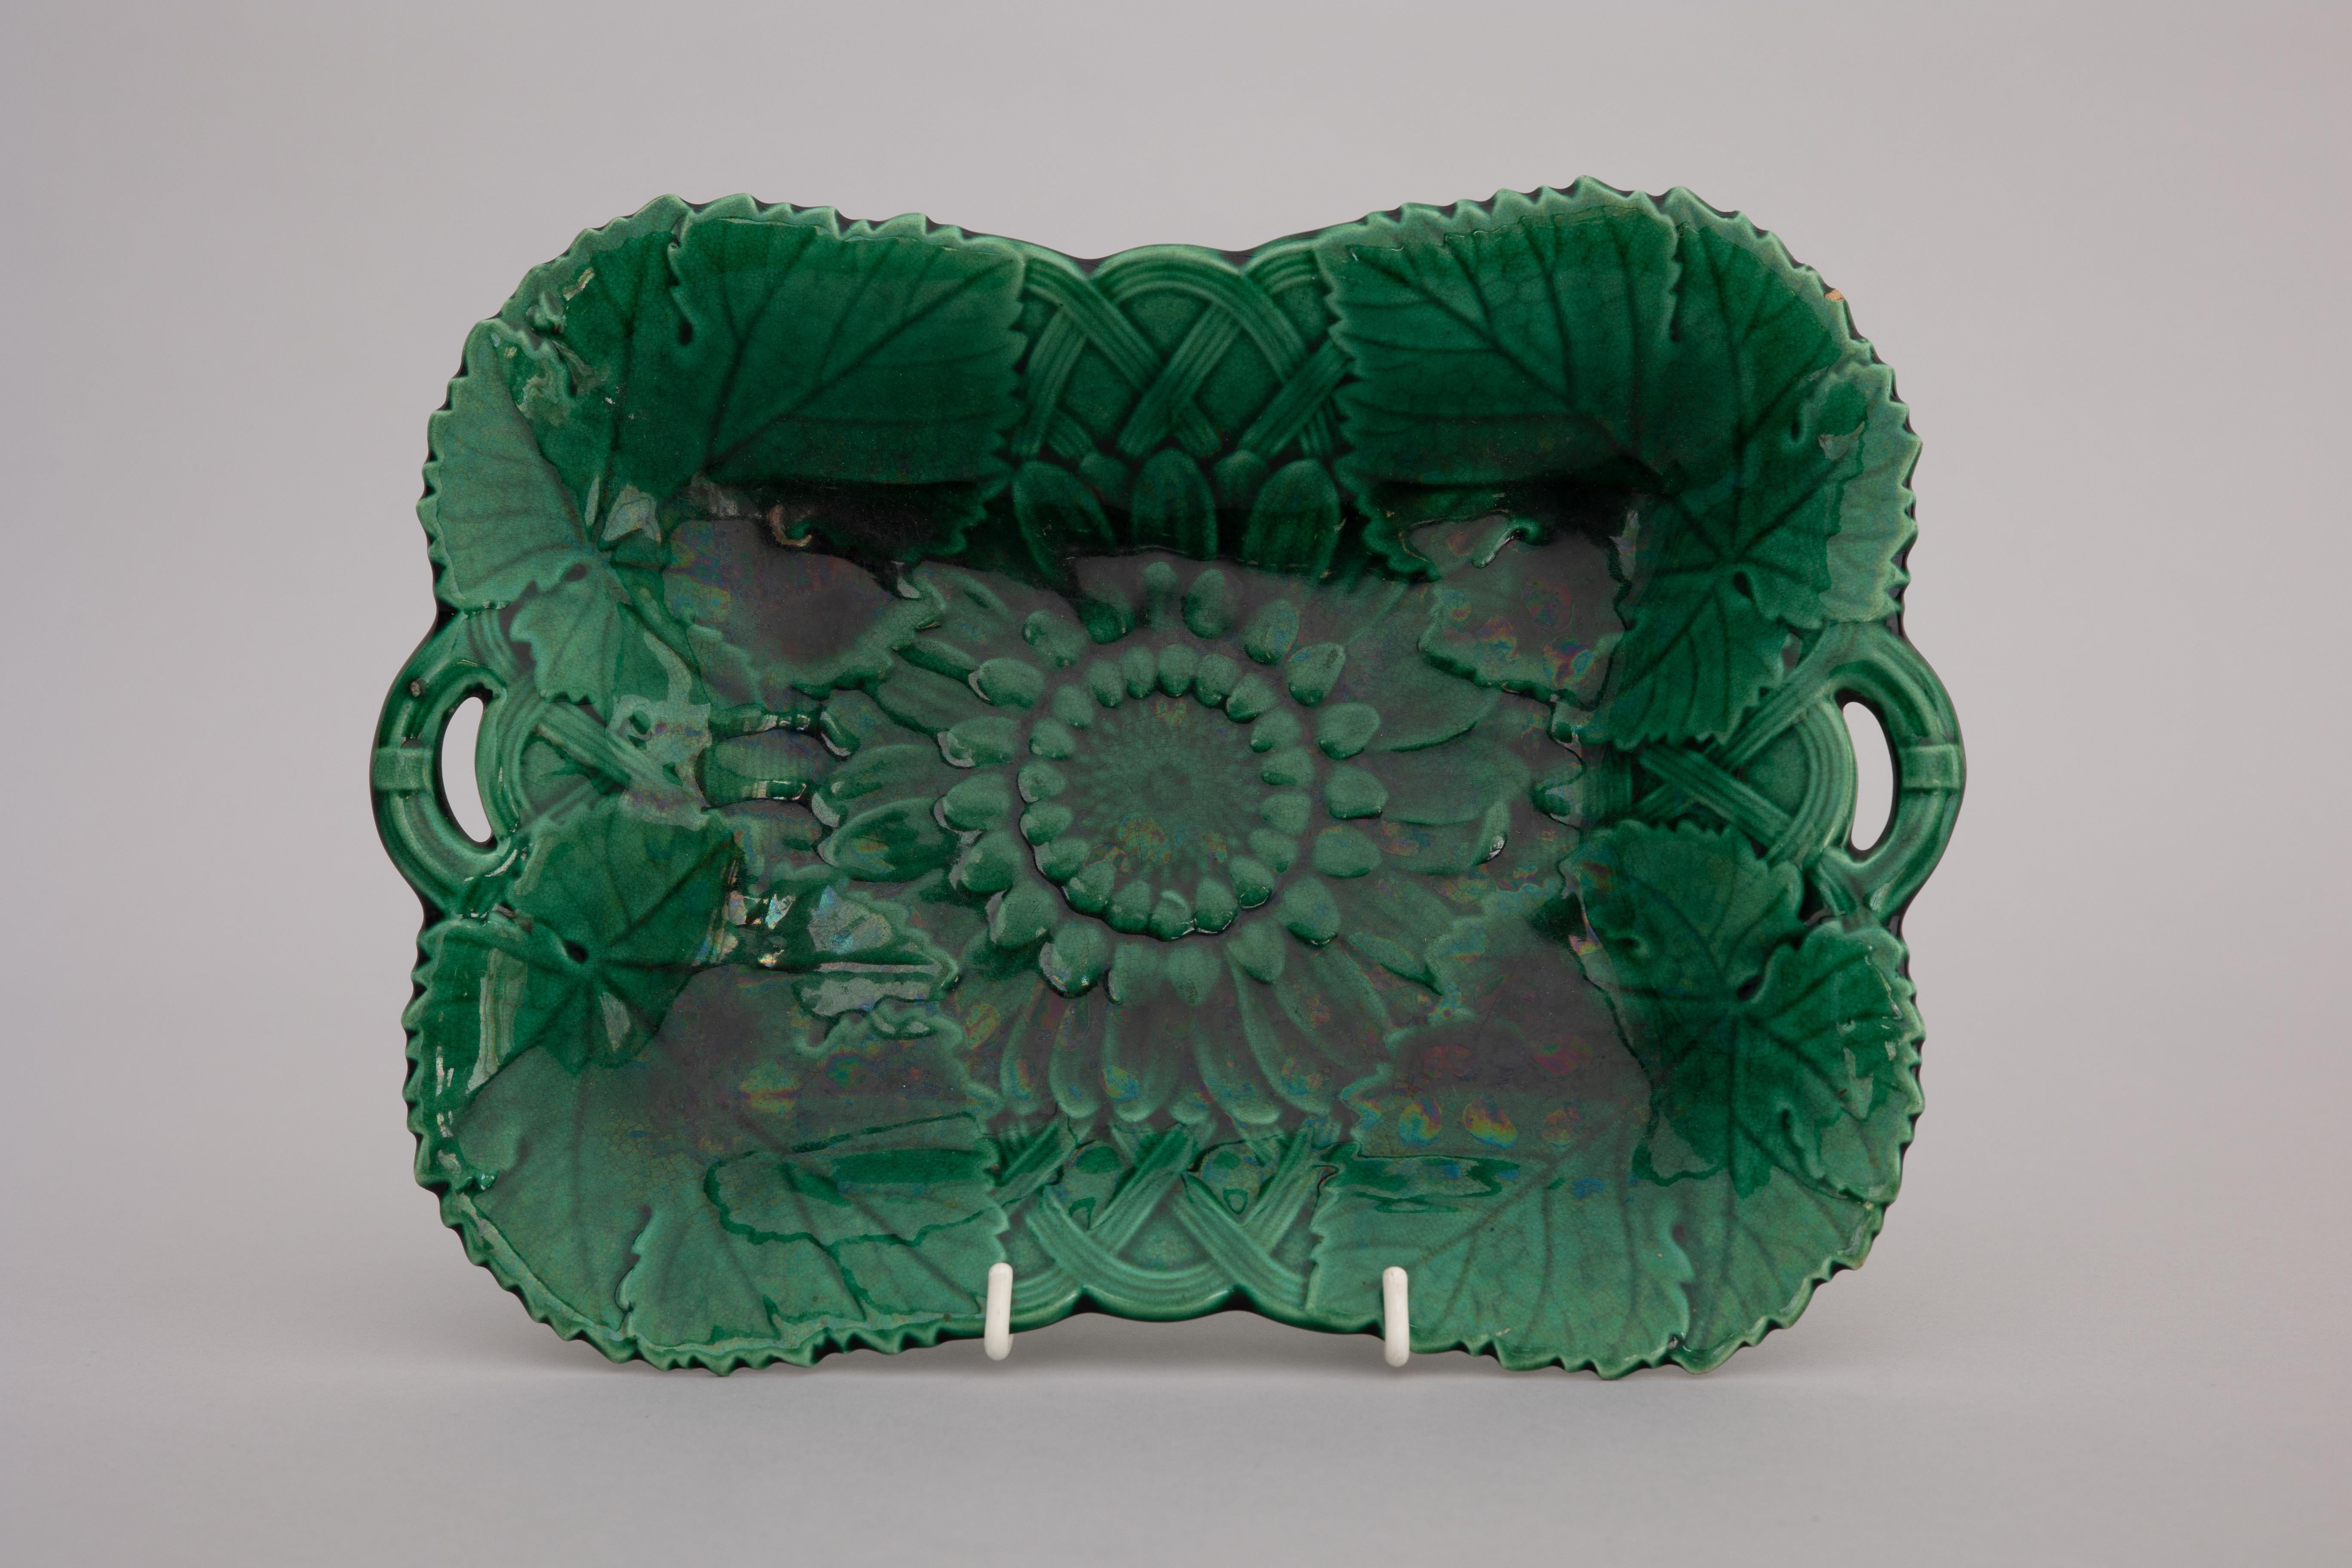 Pair of green majolica glazed serving dishes in the ‘Sunflower’ pattern by Wedgwood, made 1872.

The sunflower, alongside the calla lily and peacock feather, became an emblem of the late nineteenth-century Aesthetic Movement. Oscar Wilde became an